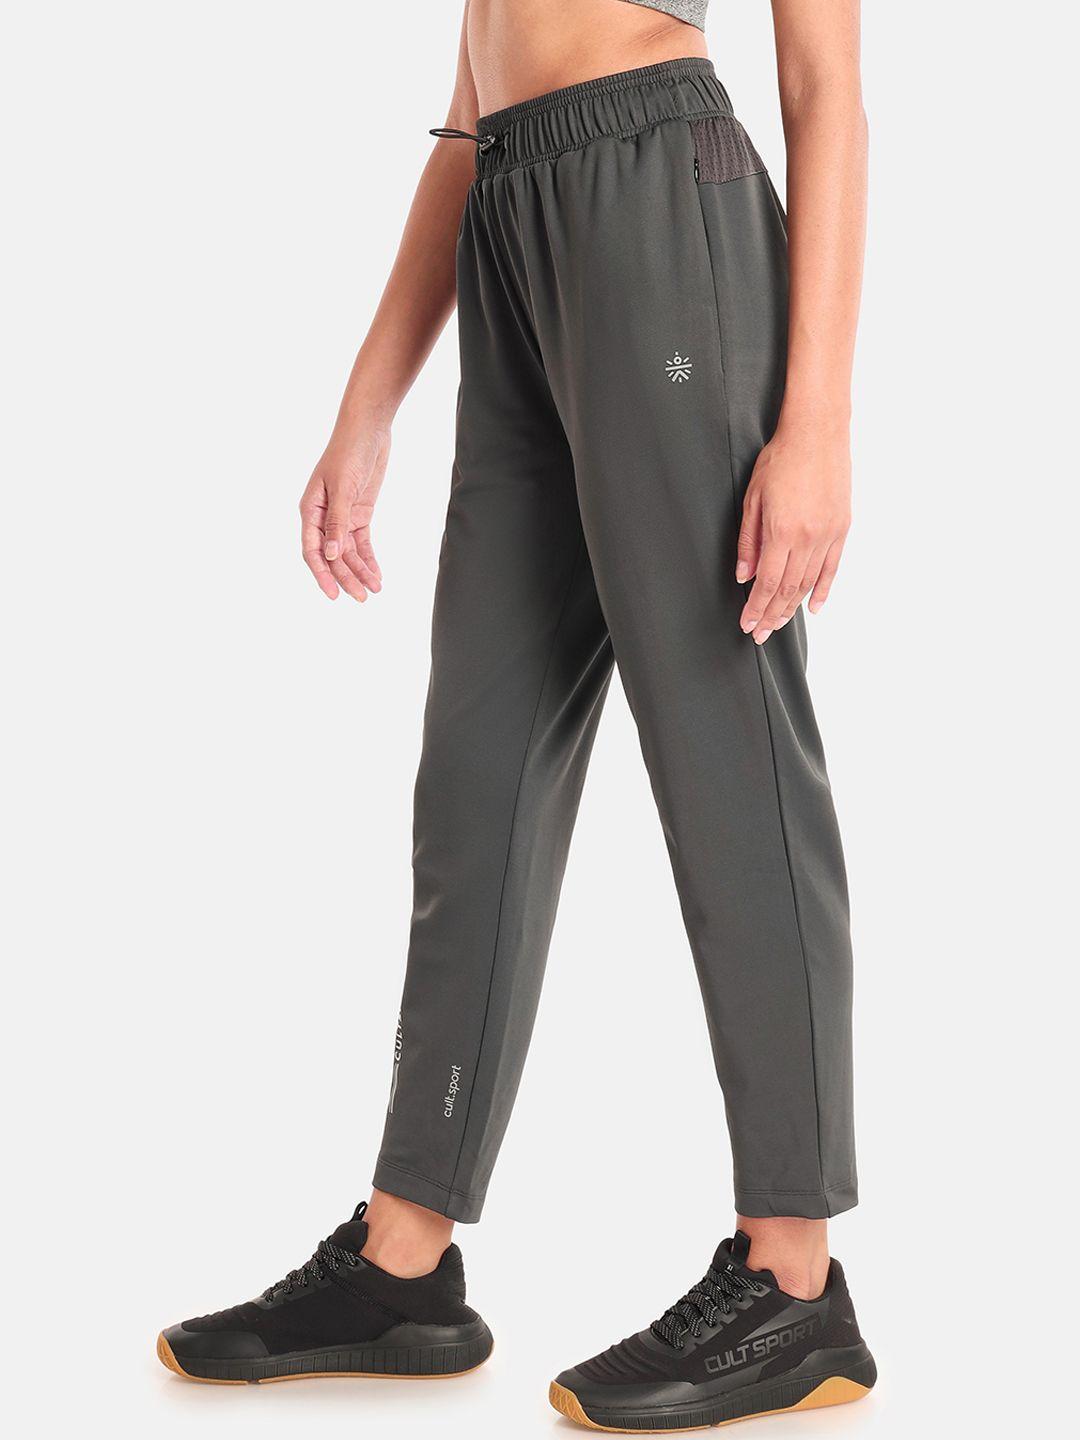 cultsport-women-slim-fit-fly-dry-running-track-pants